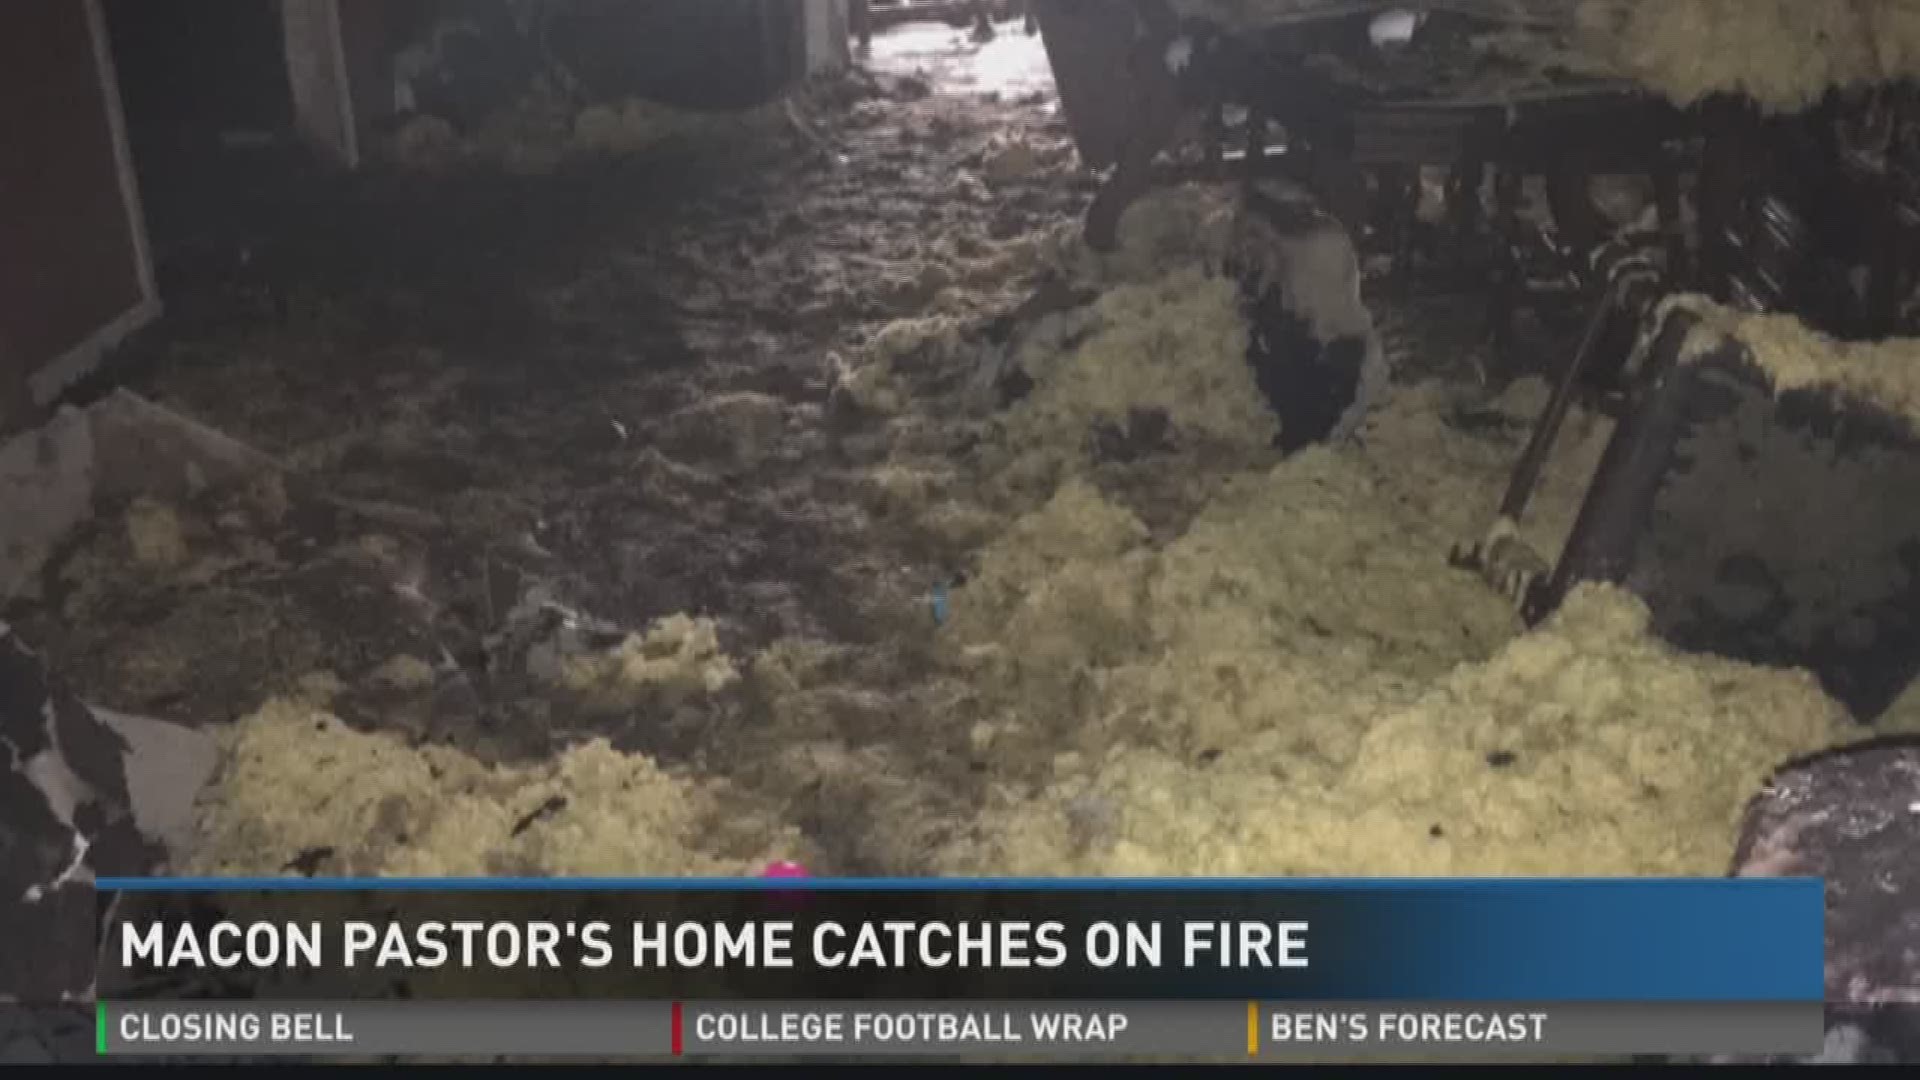 Macon pastor's home catches fire